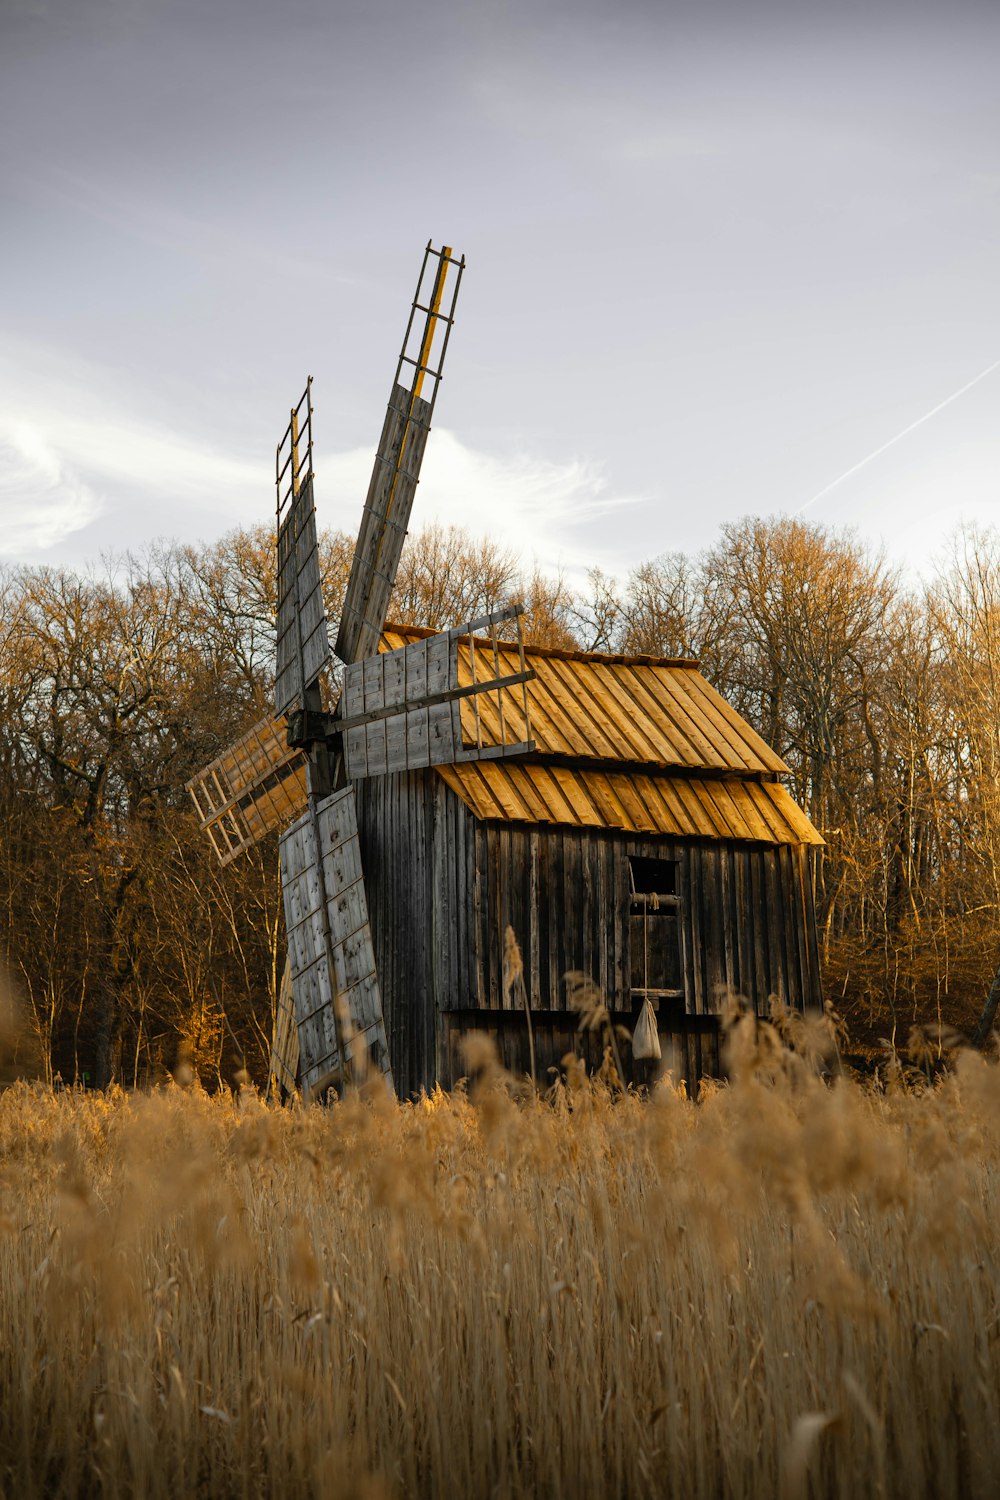 a windmill in the middle of a field of tall grass